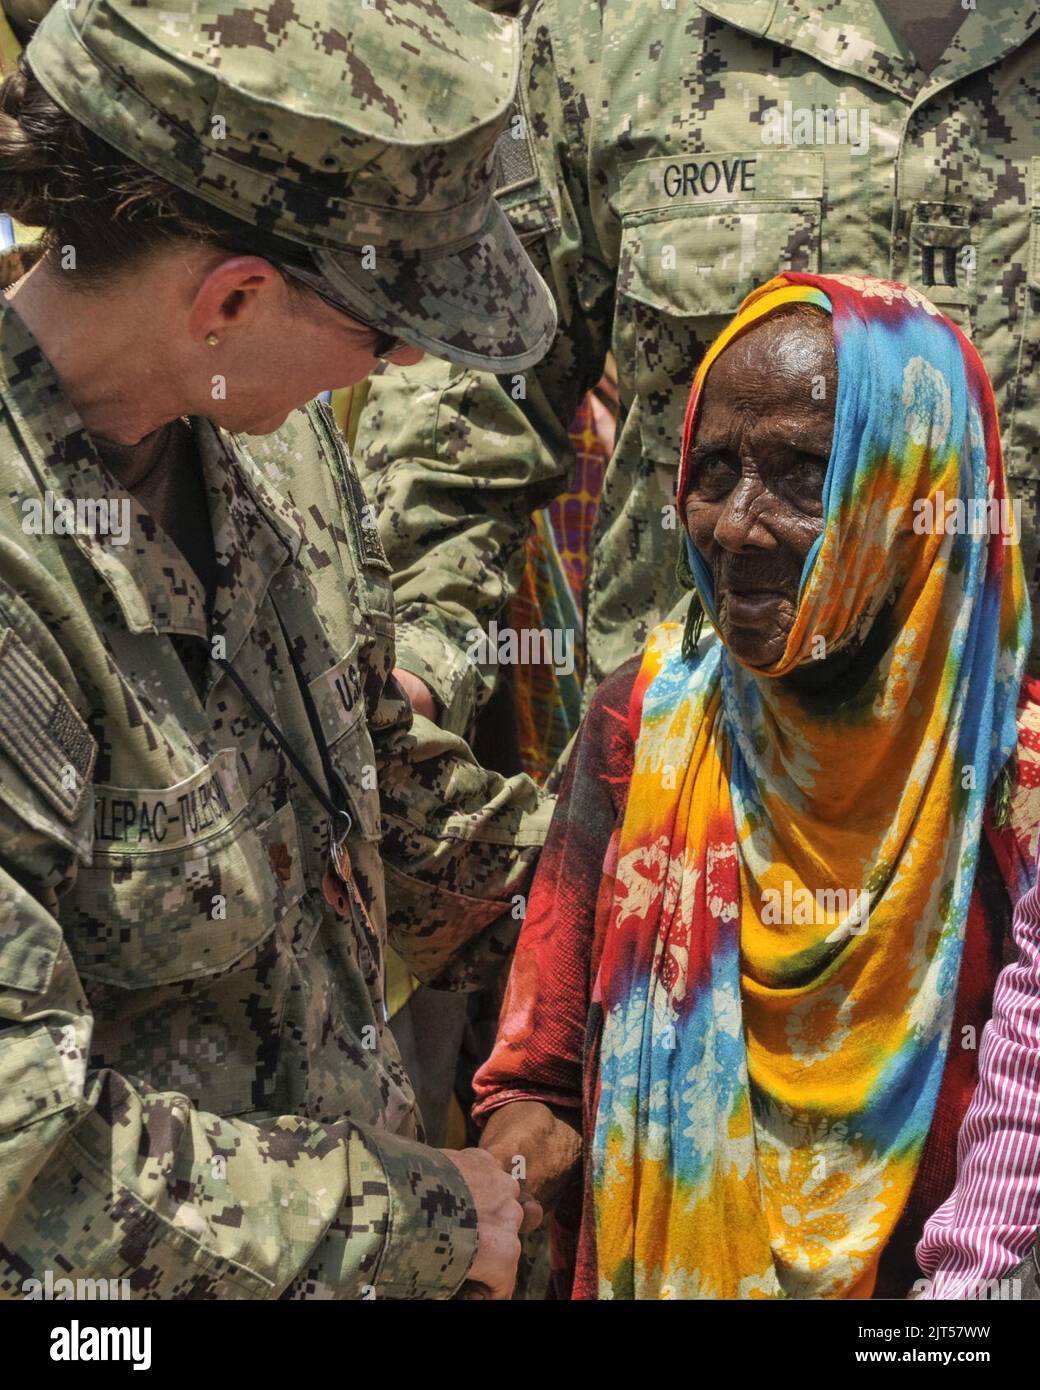 U.S. Navy Lt. Cmdr. left, the officer in charge of the expeditionary medical facility at Camp Lemonnier, Djibouti, exchanges greetings with a Djiboutian woman at the home of a community 140409 Stock Photo